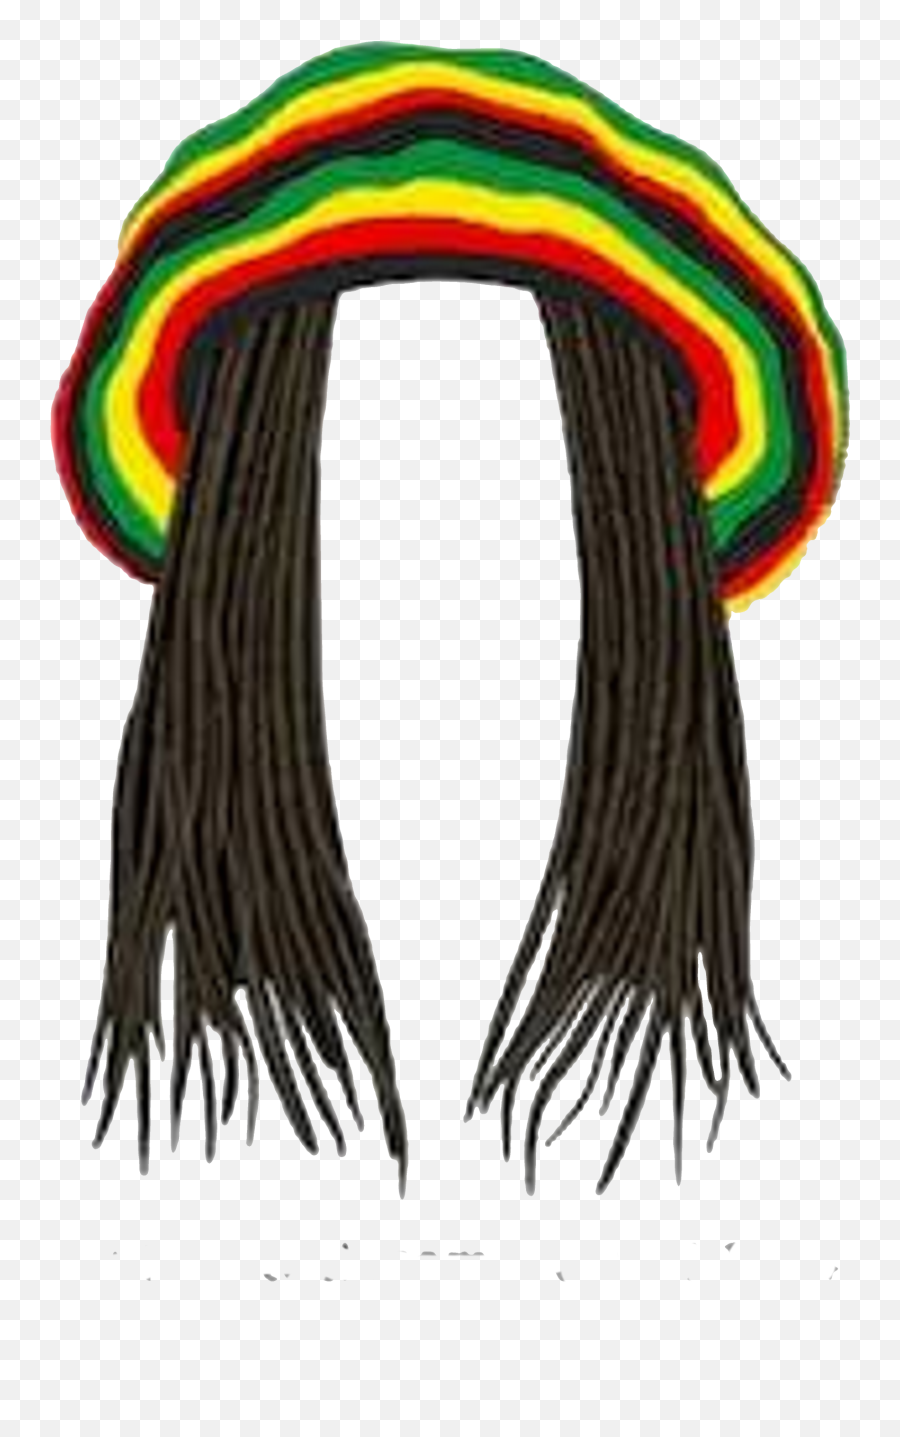 Download Rasta Hat With Dreads - Jamaican Hat With Dreads Png,Dreads Png